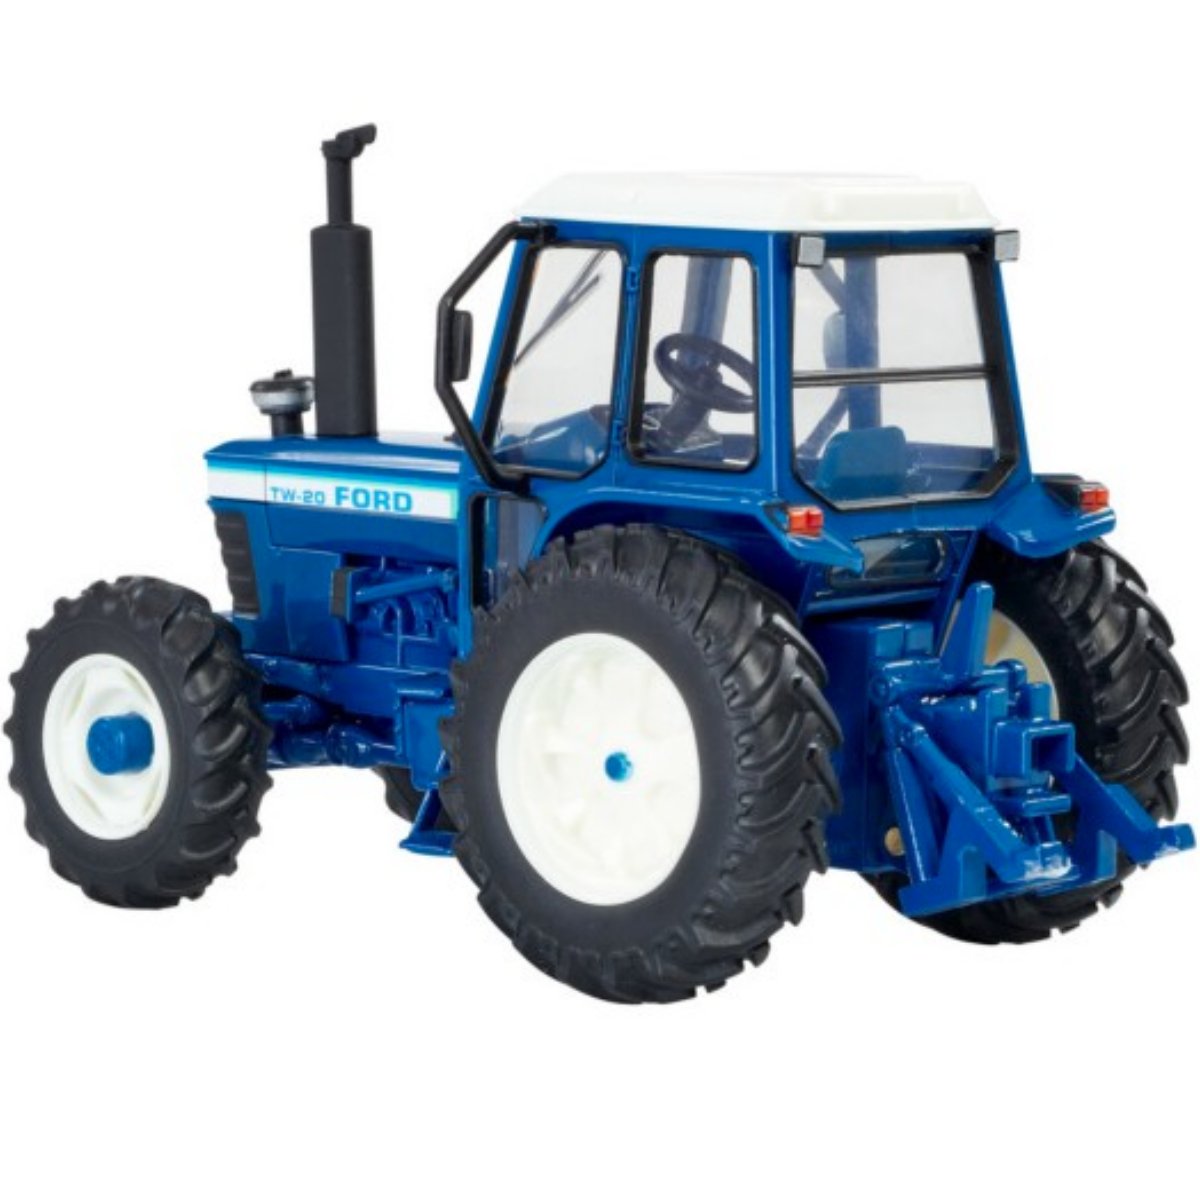 Britains Ford TW20 Tractor - 1:32 Scale - Phillips Hobbies